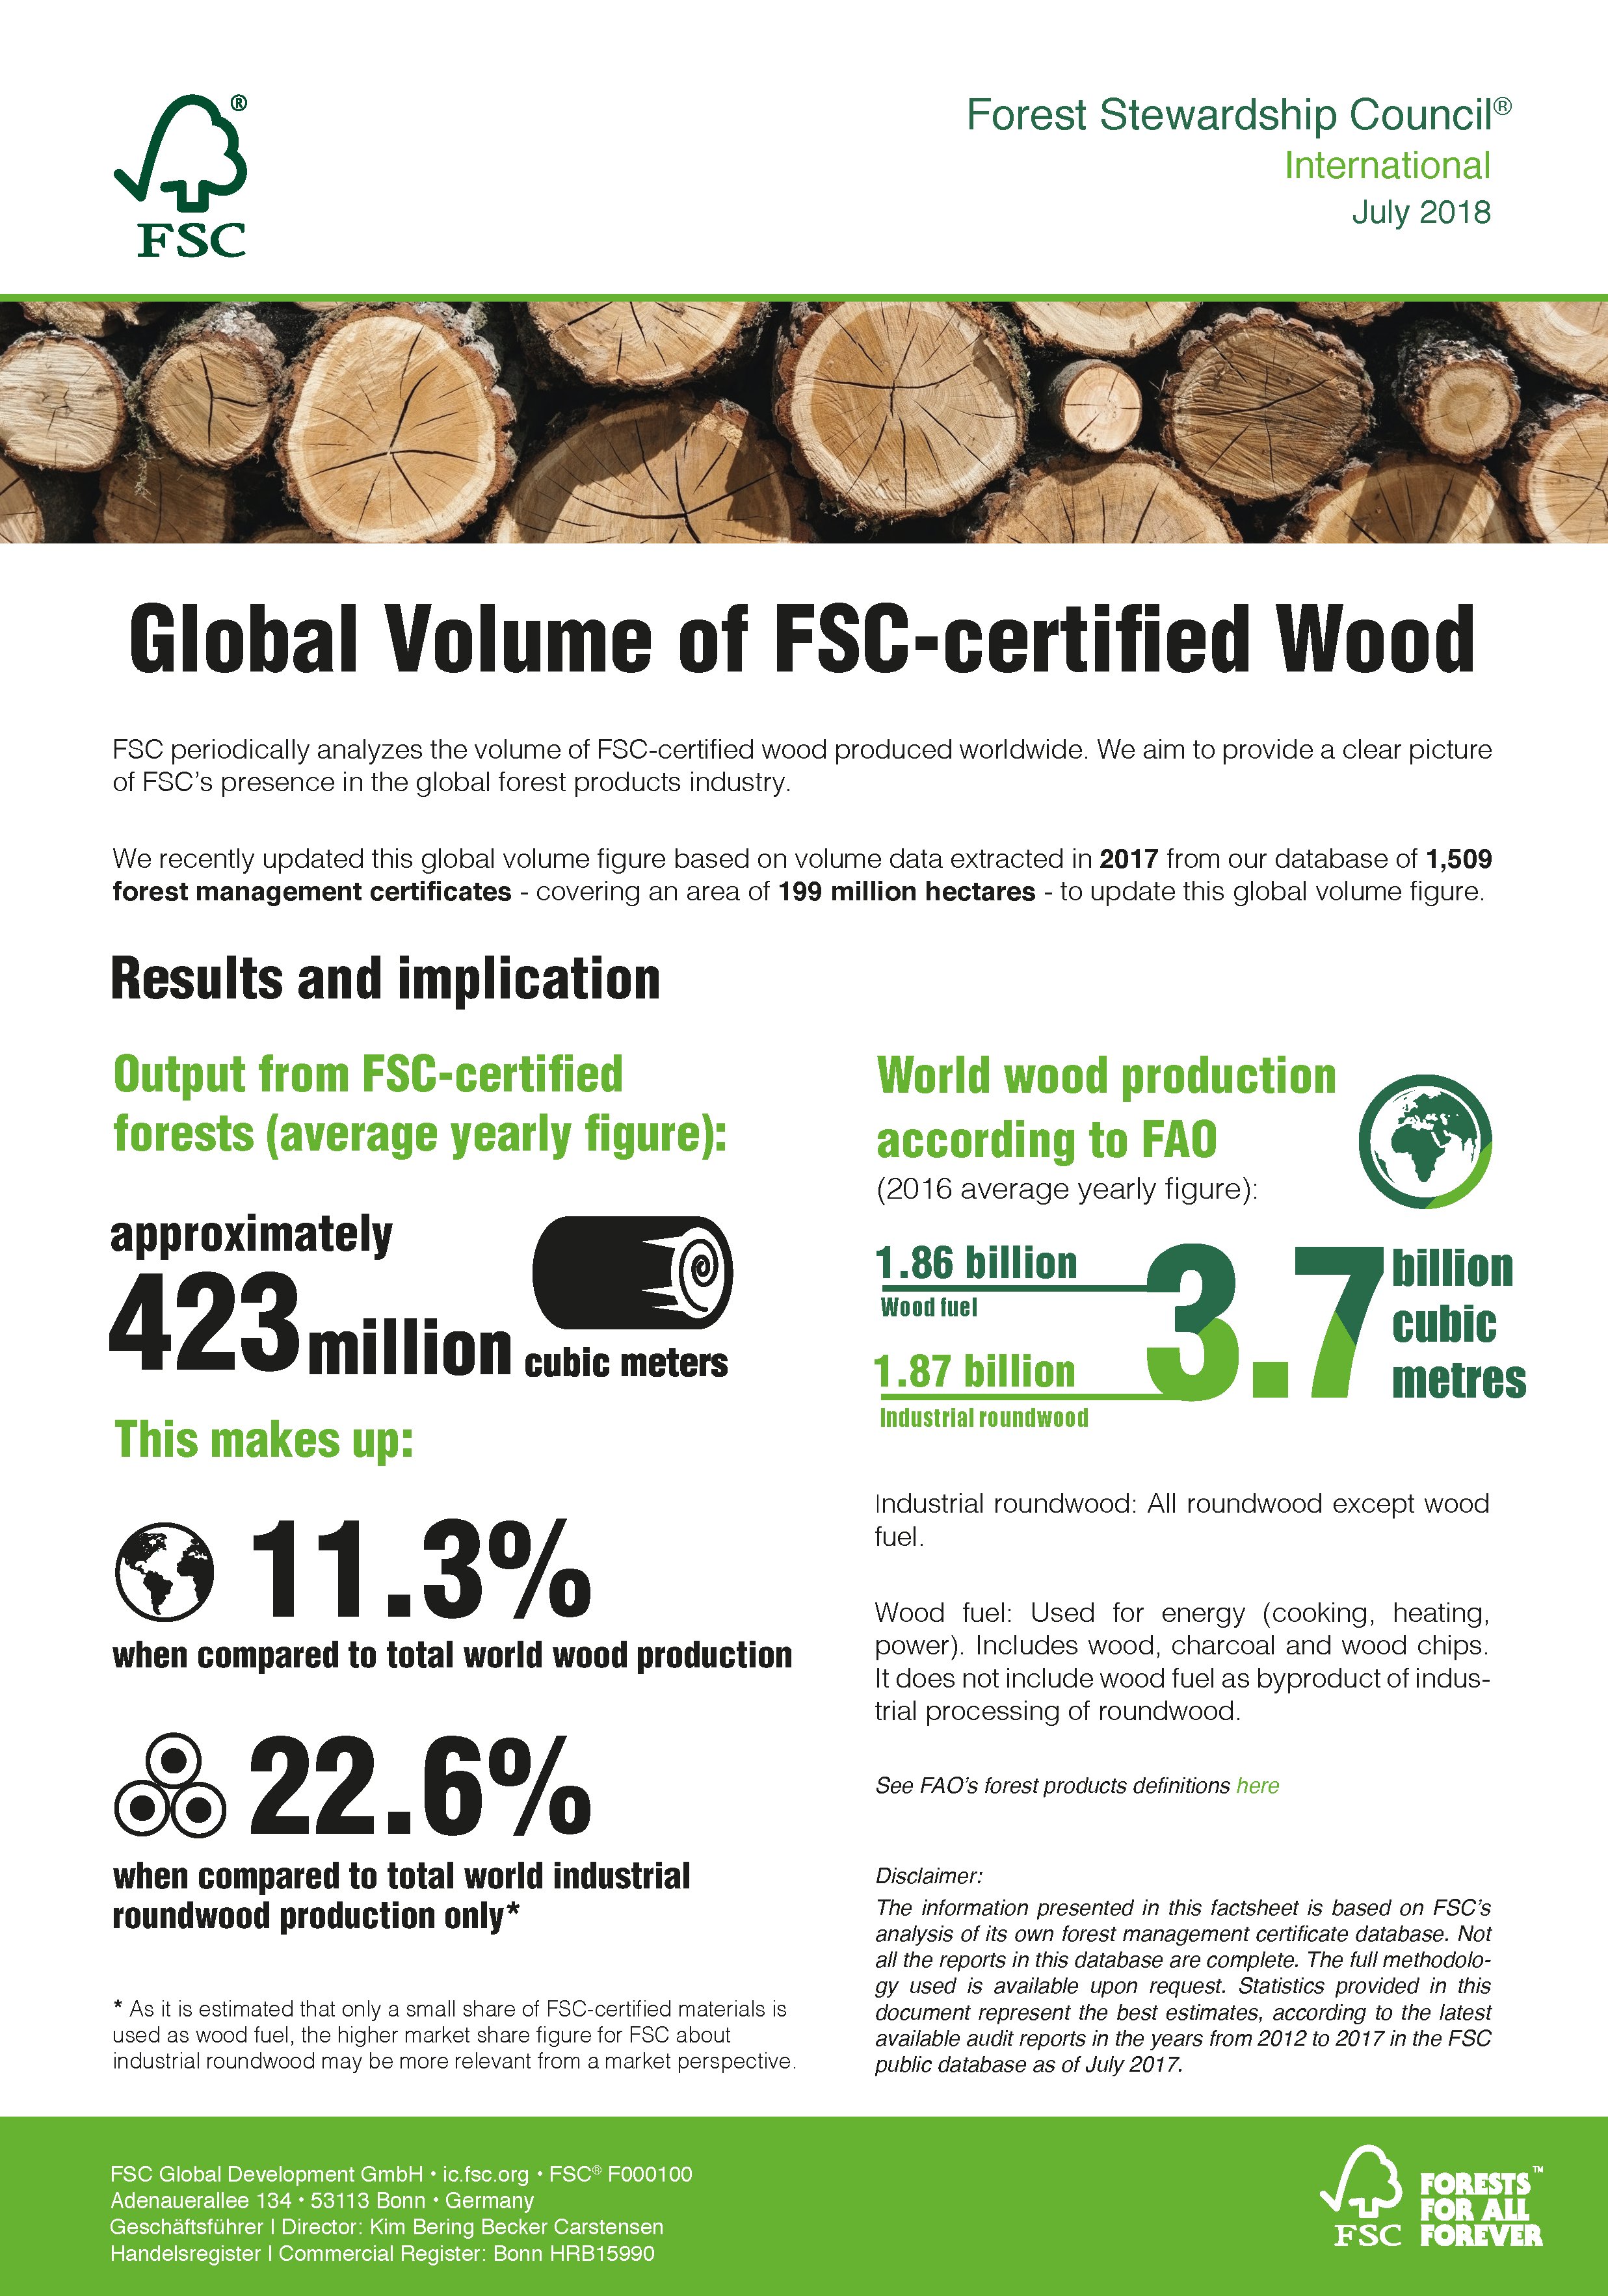 FSC Australia & New Zealand on X: Approximately 423 million cubic meters  of wood is harvested per year in FSC-certified forests globally. FSC  certified timber makes up 22.6% of global industrial roundwood